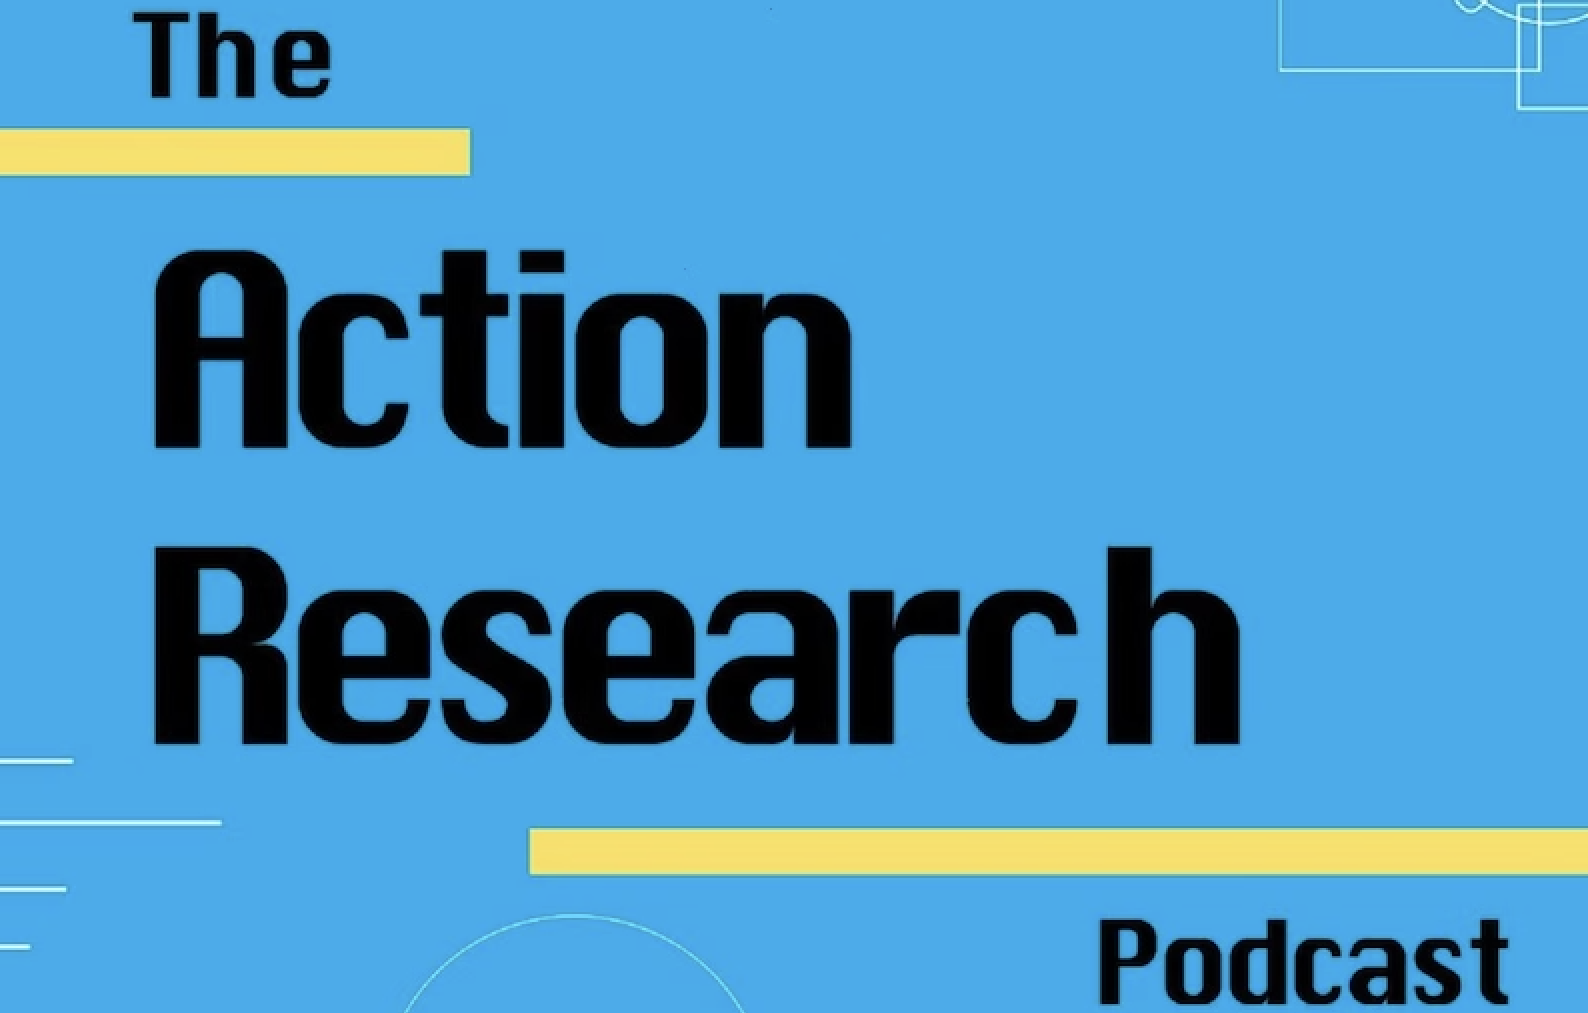 The Action Research Podcast logo